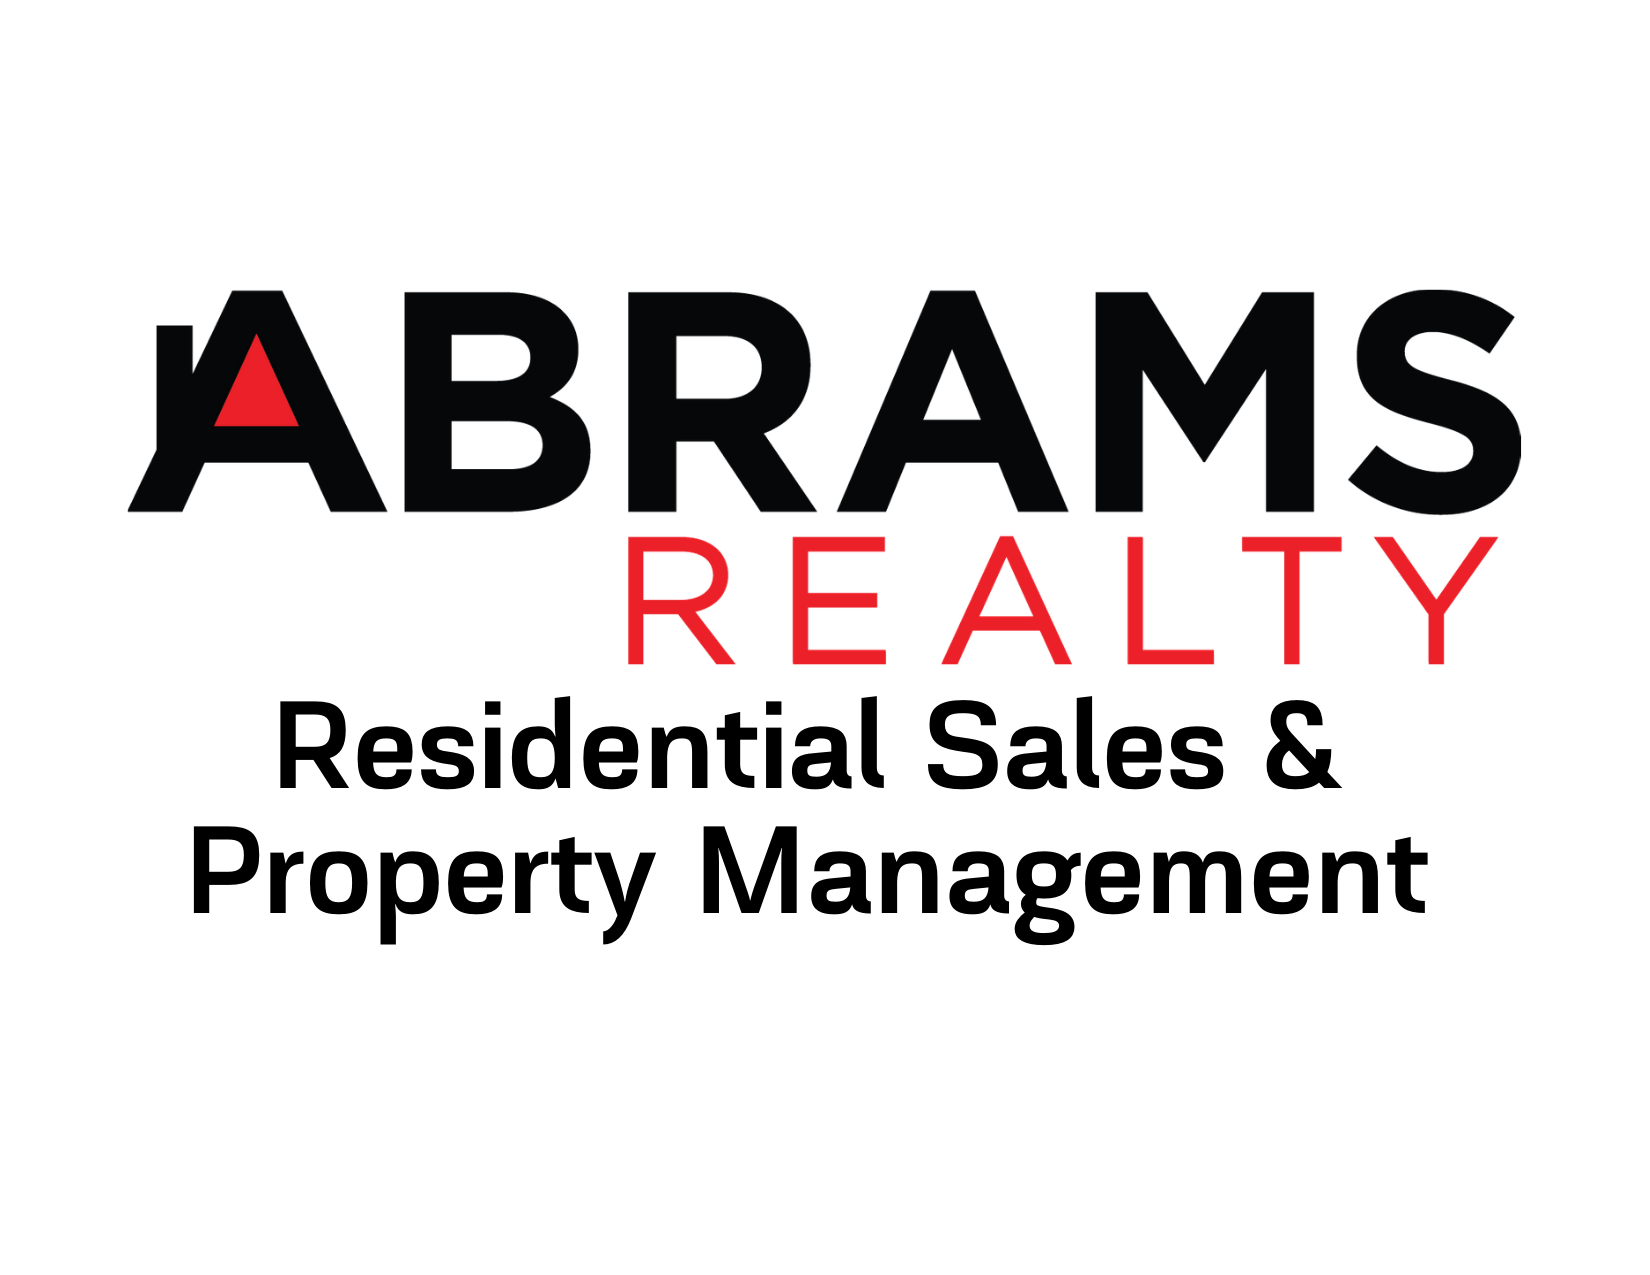 Abrams Realty